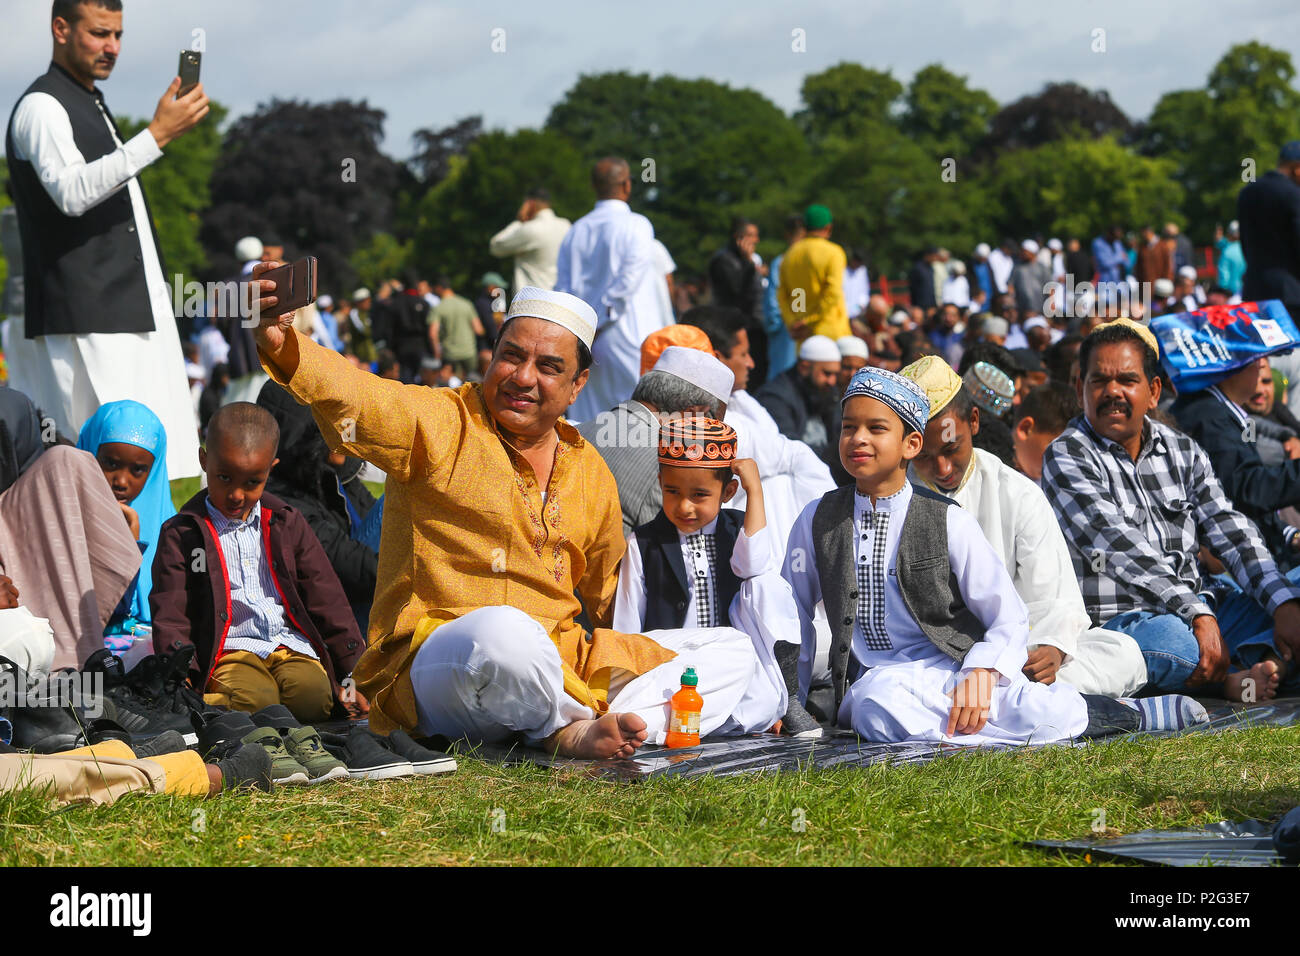 Birmingham, UK. 15th June, 2018. Over 100,000 muslims gather in Small Heath park, Birmingham, to pray on the morning of Eid, the end of the fasting month of Ramadan. Peter Lopeman/Alamy Live News Stock Photo